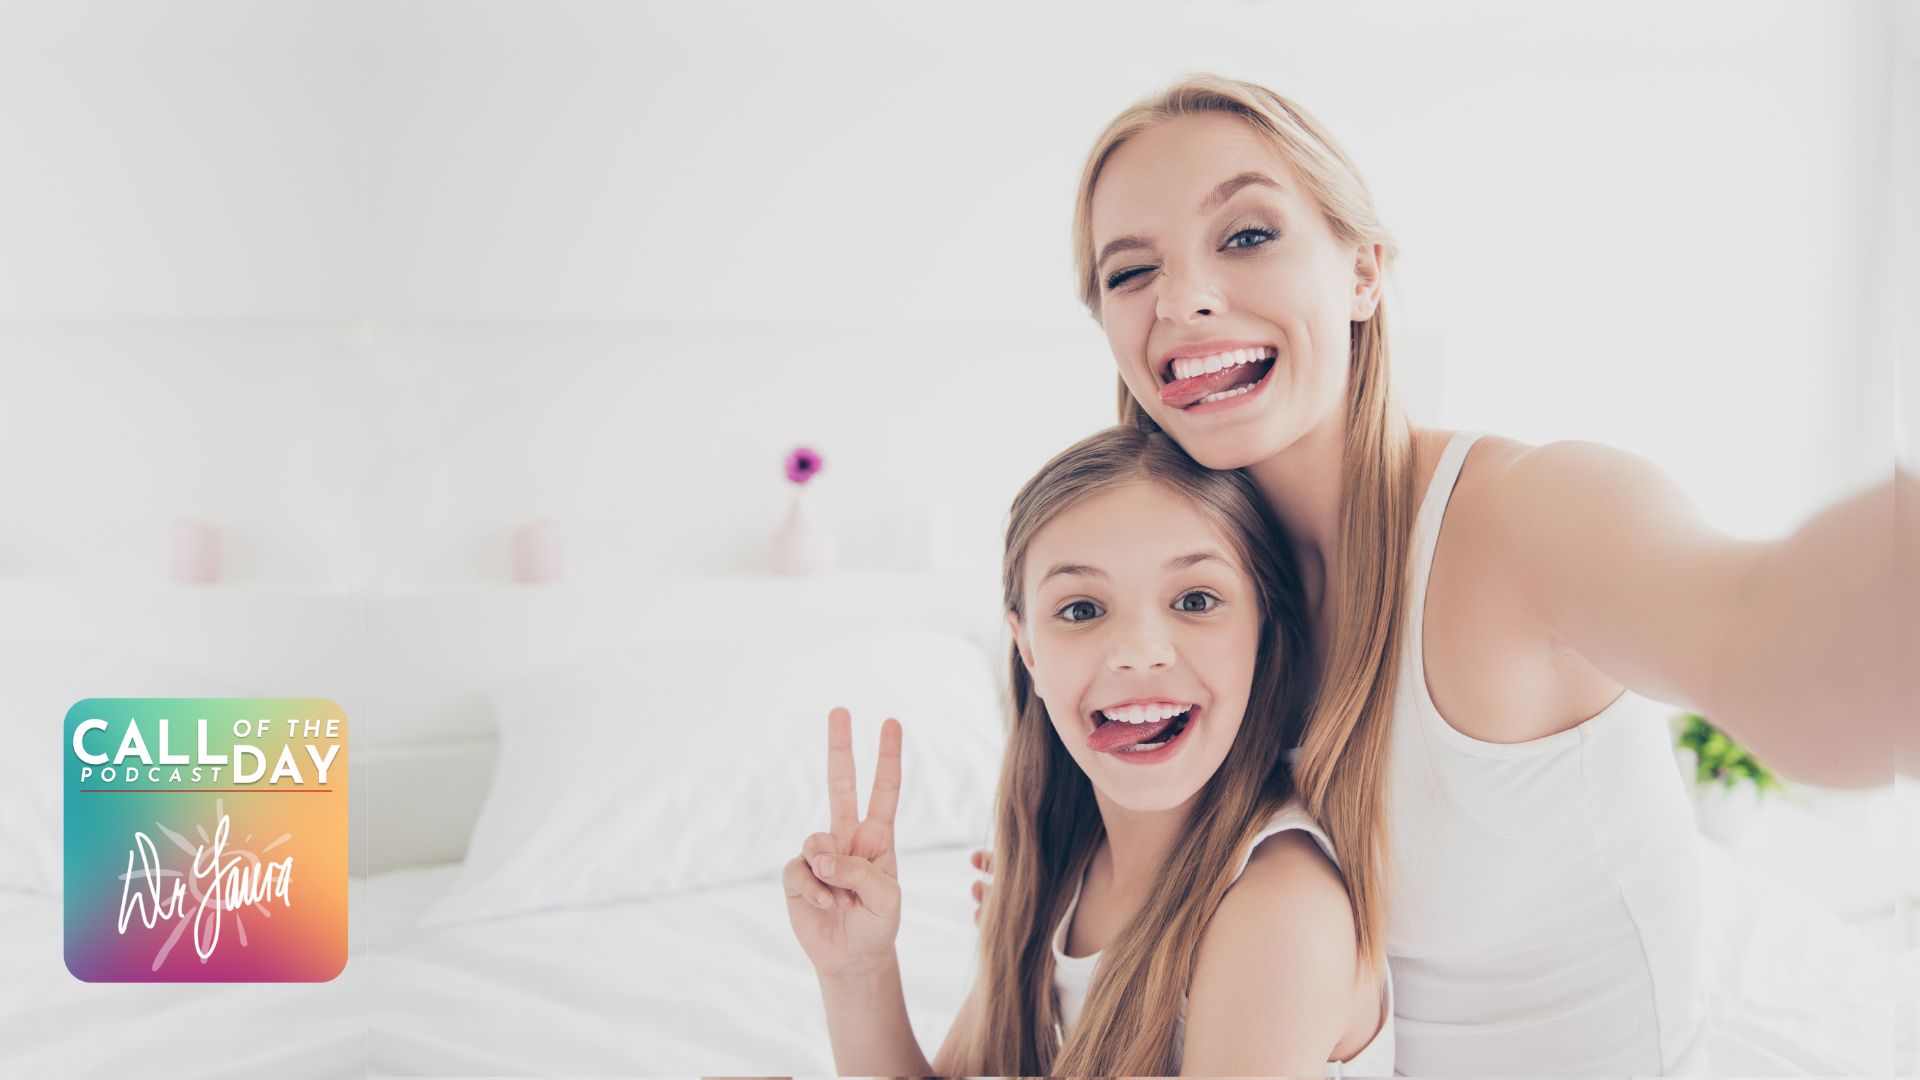 Call of the Day Podcast: What Does it Take to Be a Good Older Sister?